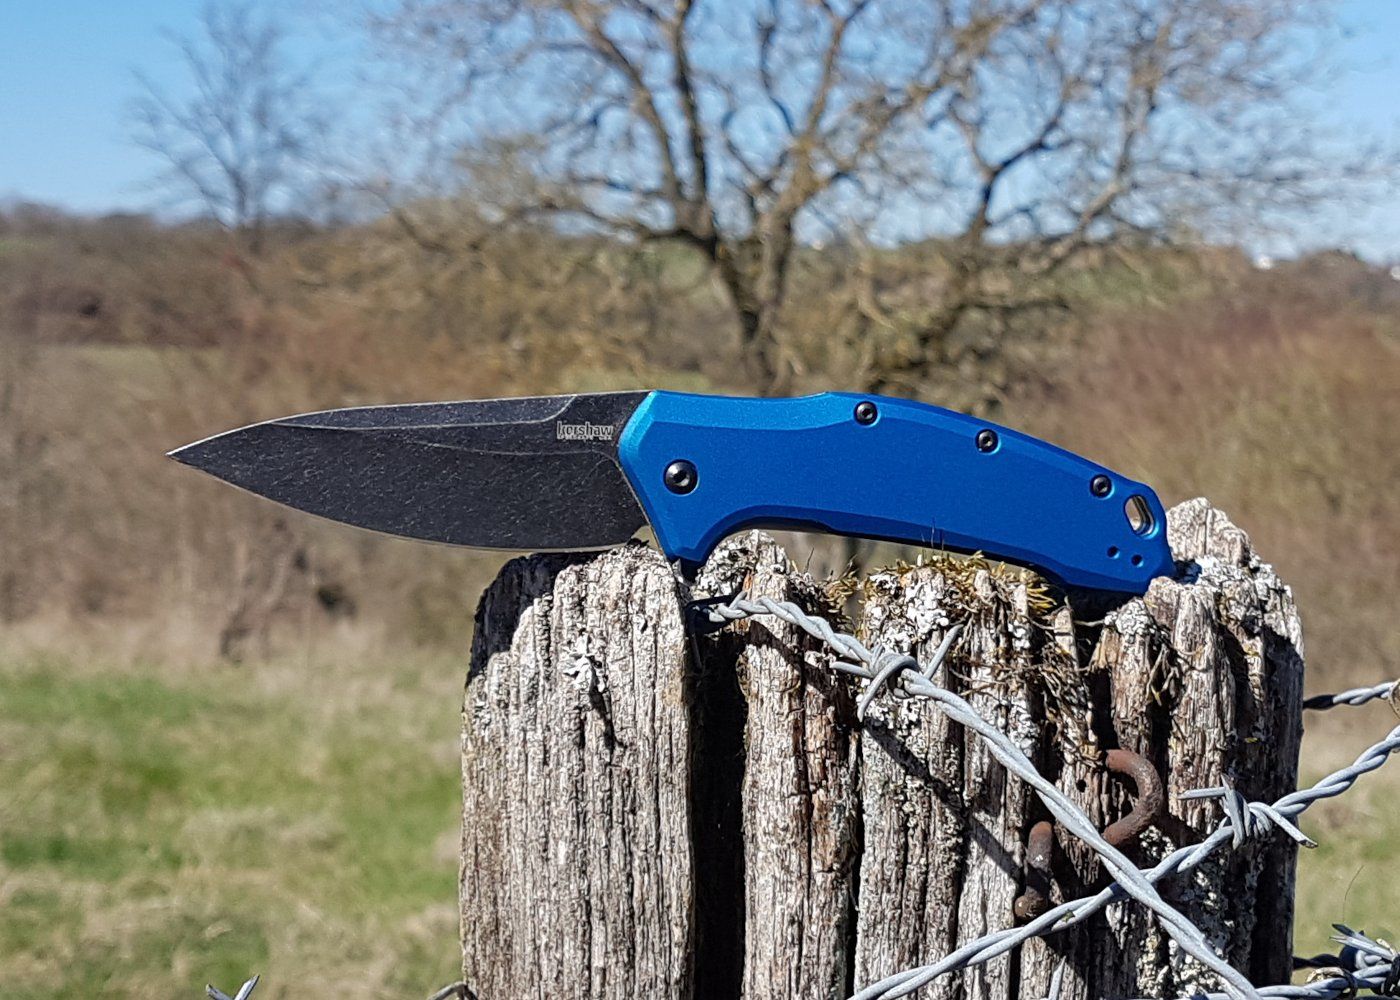 Kershaw Link Review